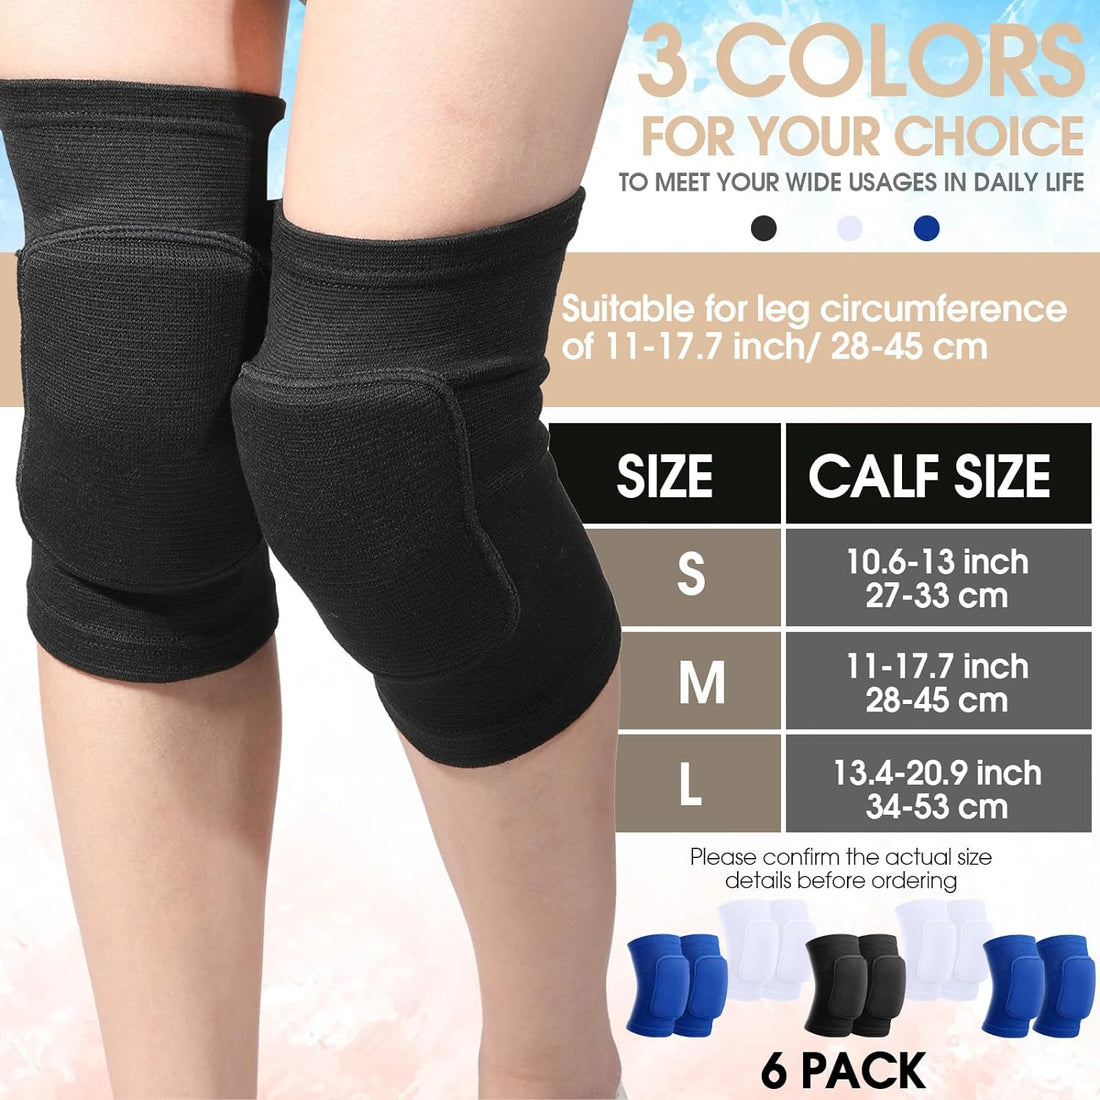 Yunsailing 6 Pairs Knee Pads for Women Men, Soft Breathable Volleyball Knee Pads Tactical Knee Pads Knee Protector Workout Knee Pads for Basketball Football Hockey Dance Running (Black,S Size)